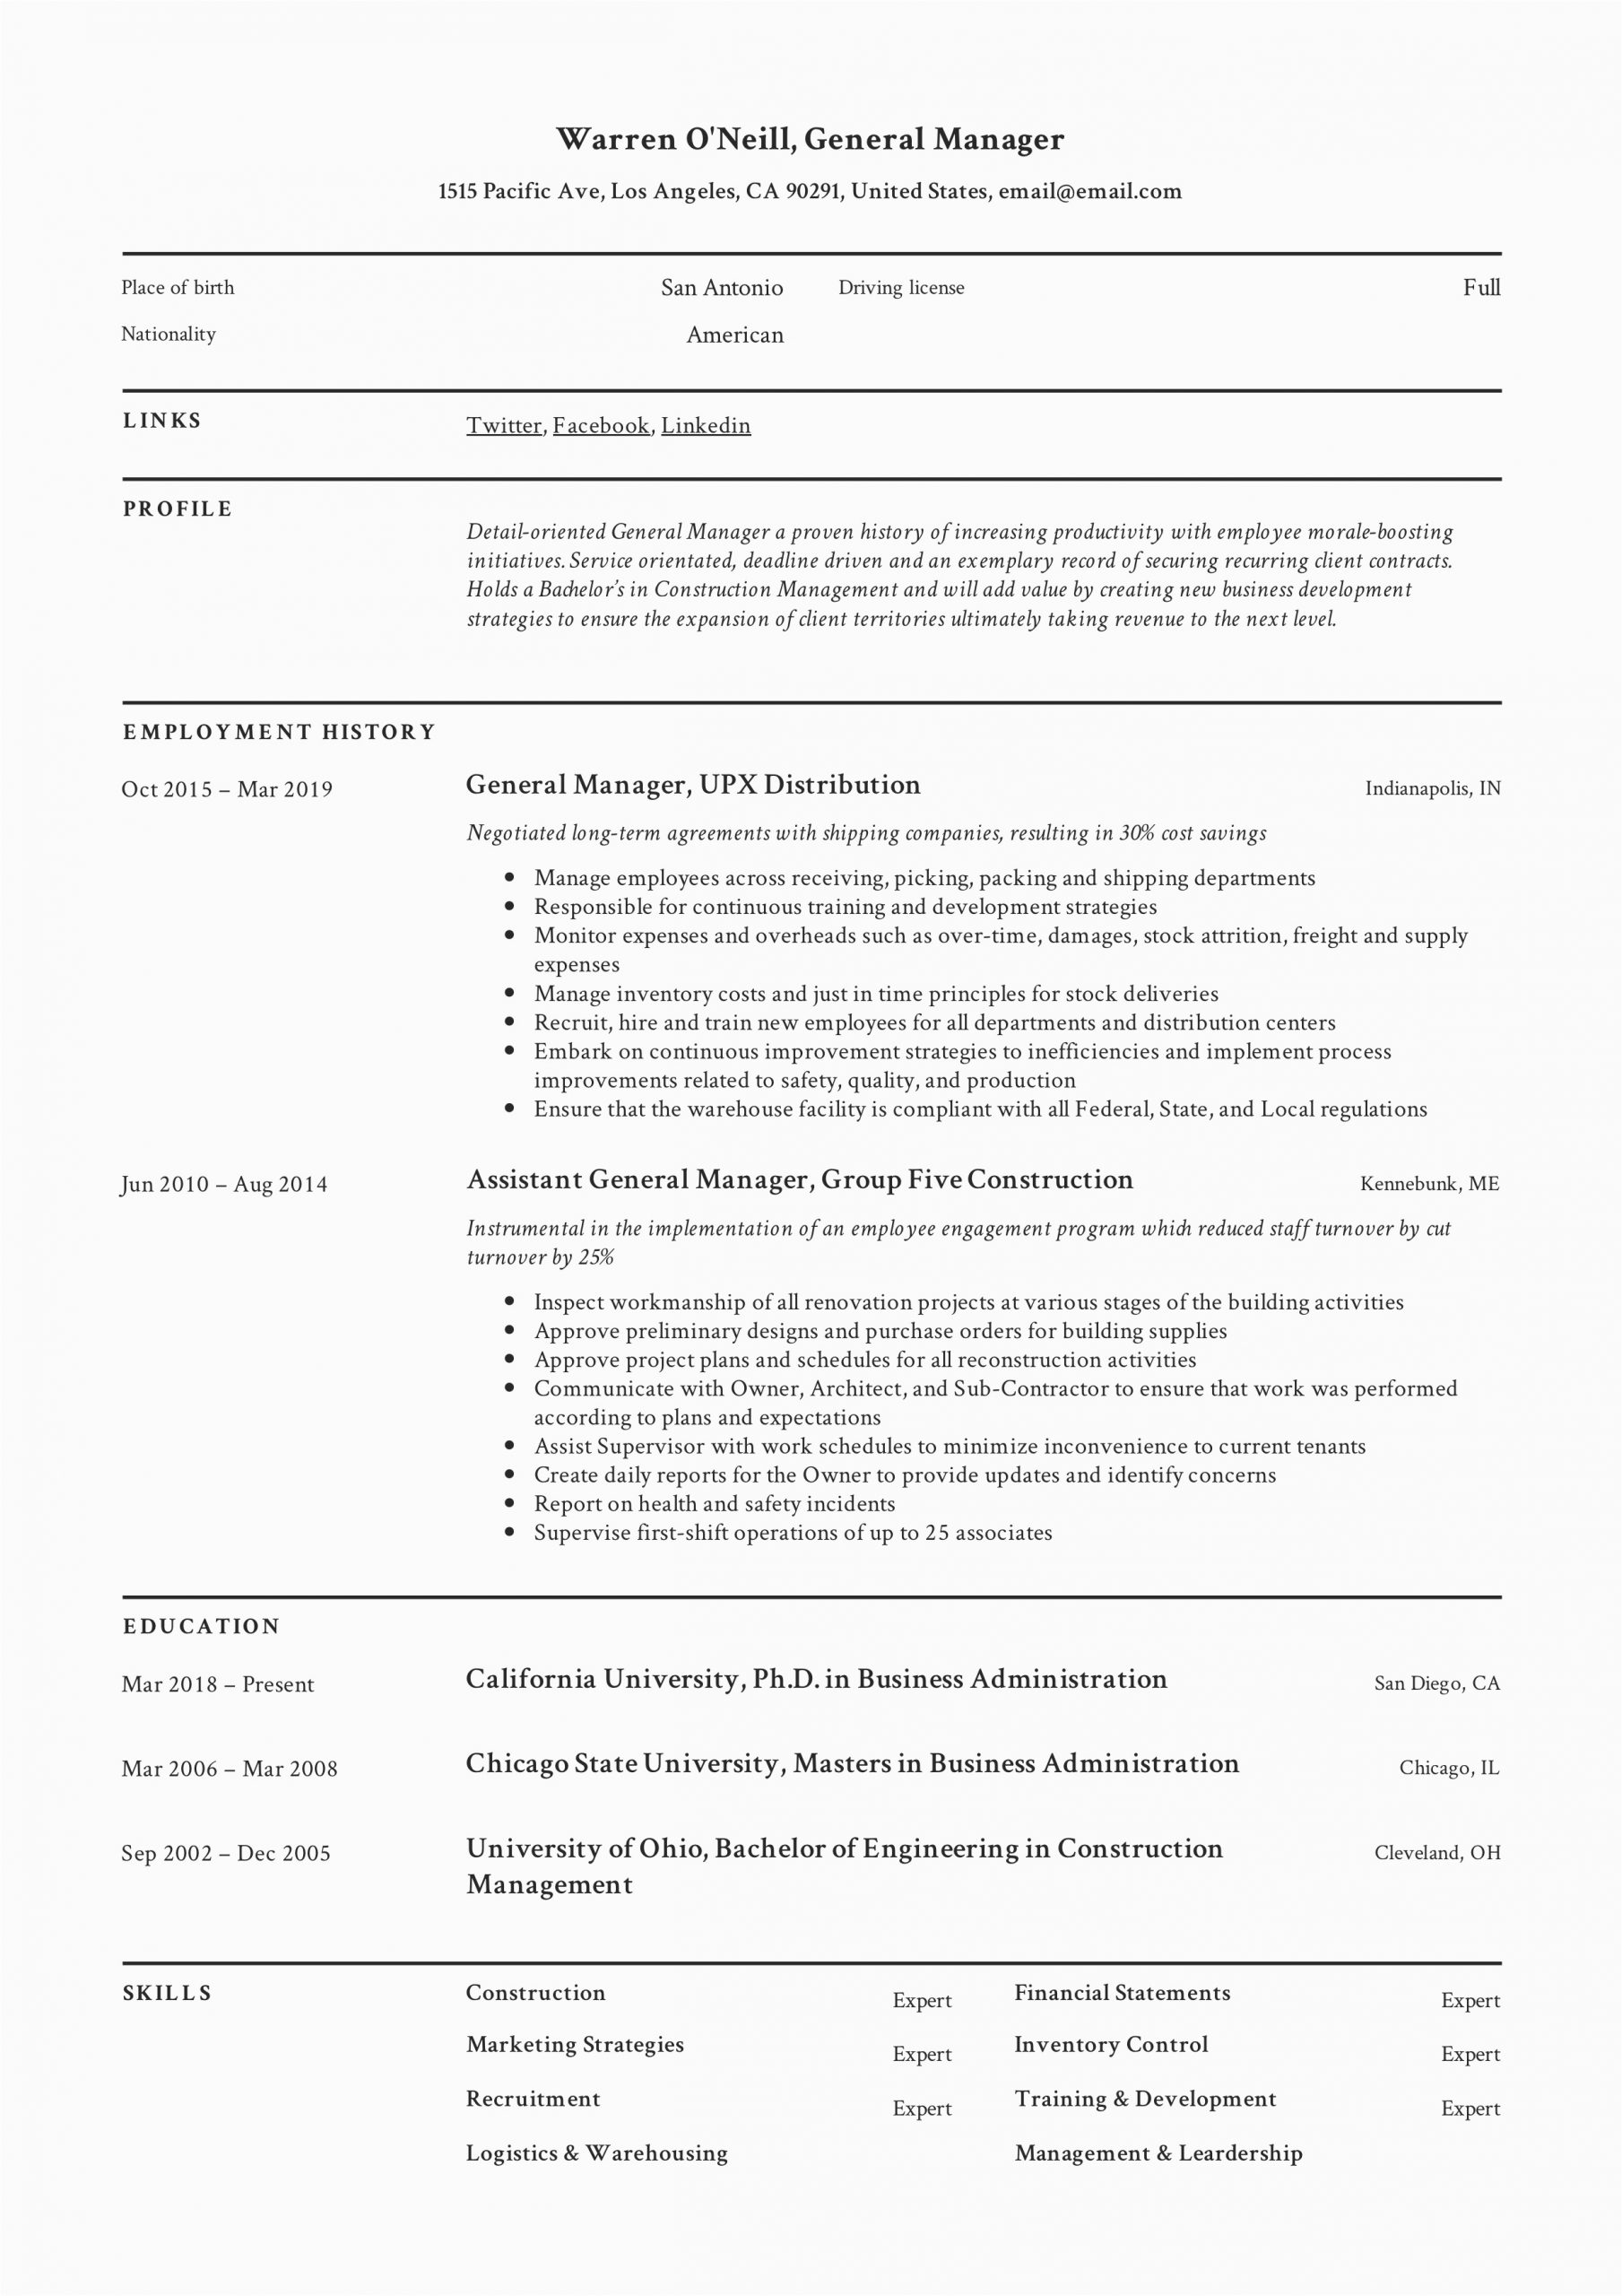 Sample Resume for General Manager Position General Manager Resume & Writing Guide